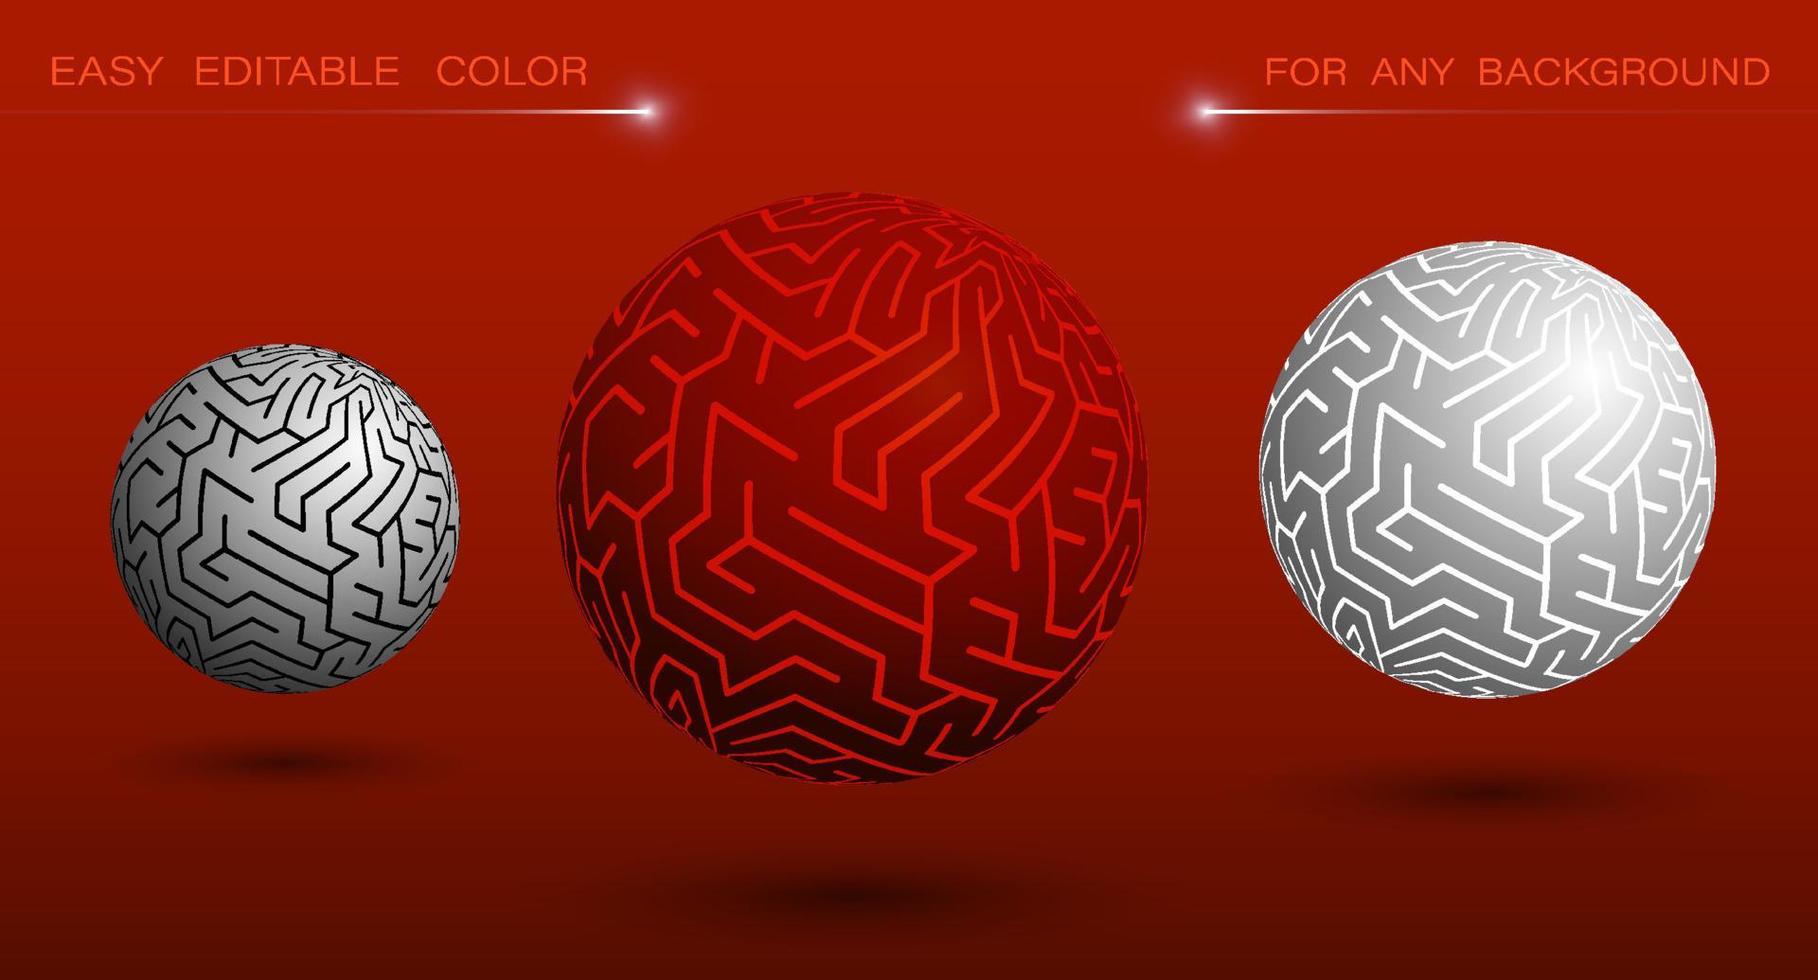 decorative sphere with labyrinth ornament. Design element or ready made tech banner decoration. Easy to edit ornament and background color. Vector